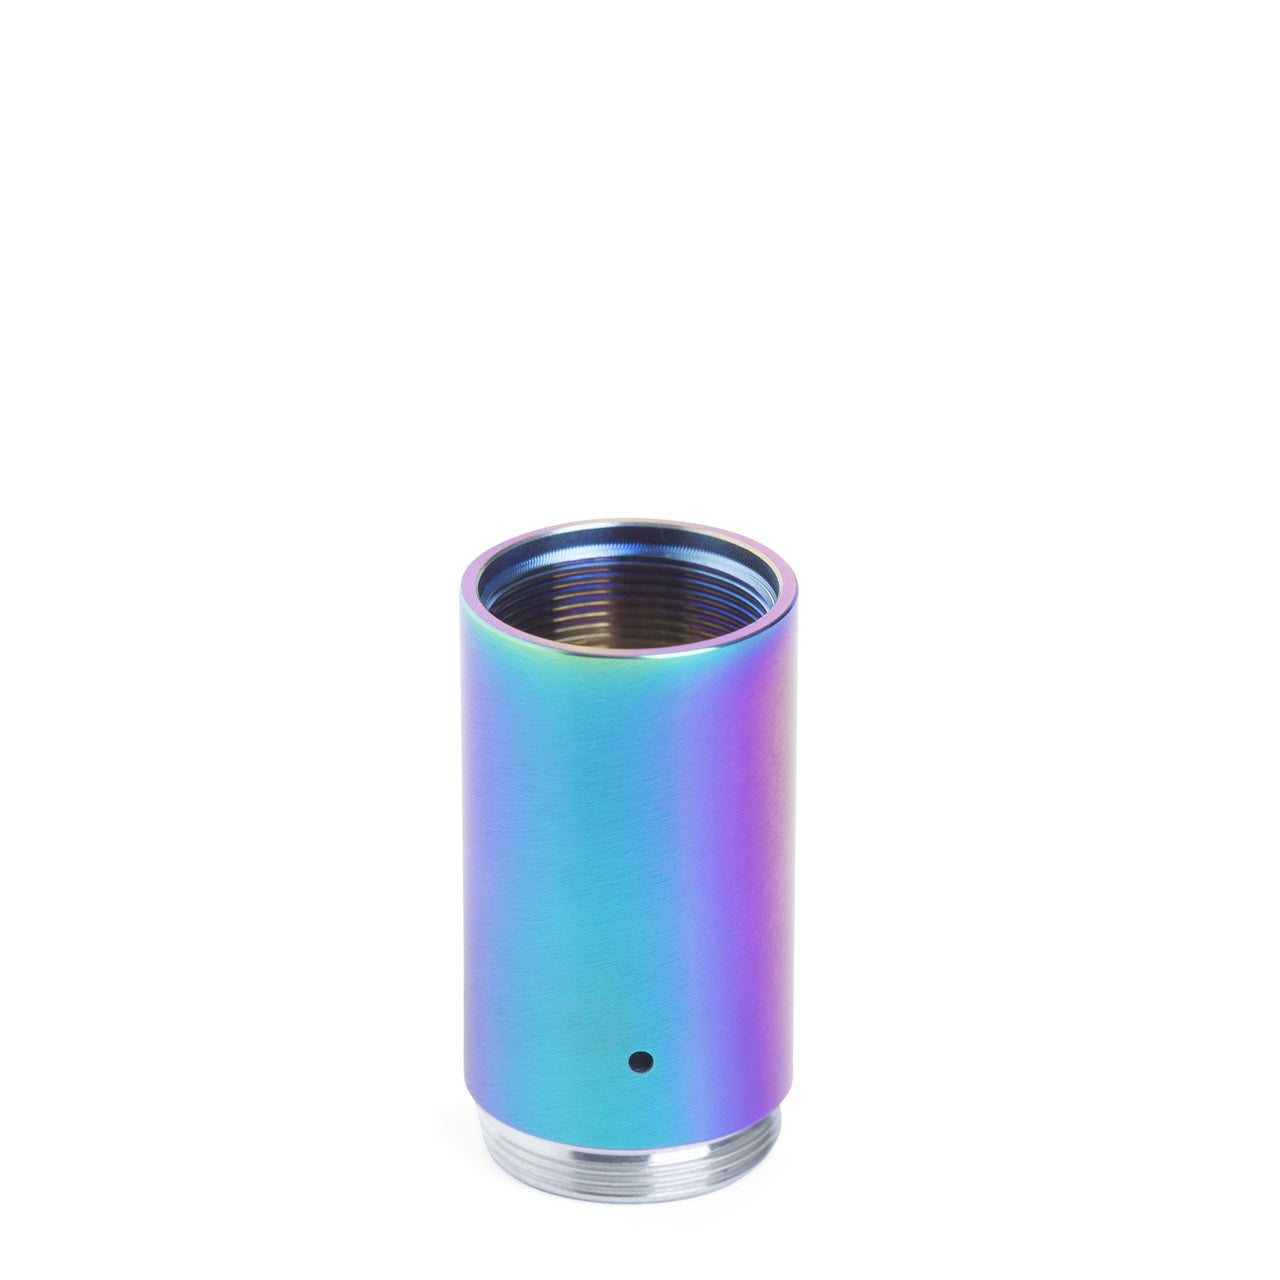 LINX Hypnos Zero Atomizer - Iridescent - 420 Science - The most trusted online smoke shop.